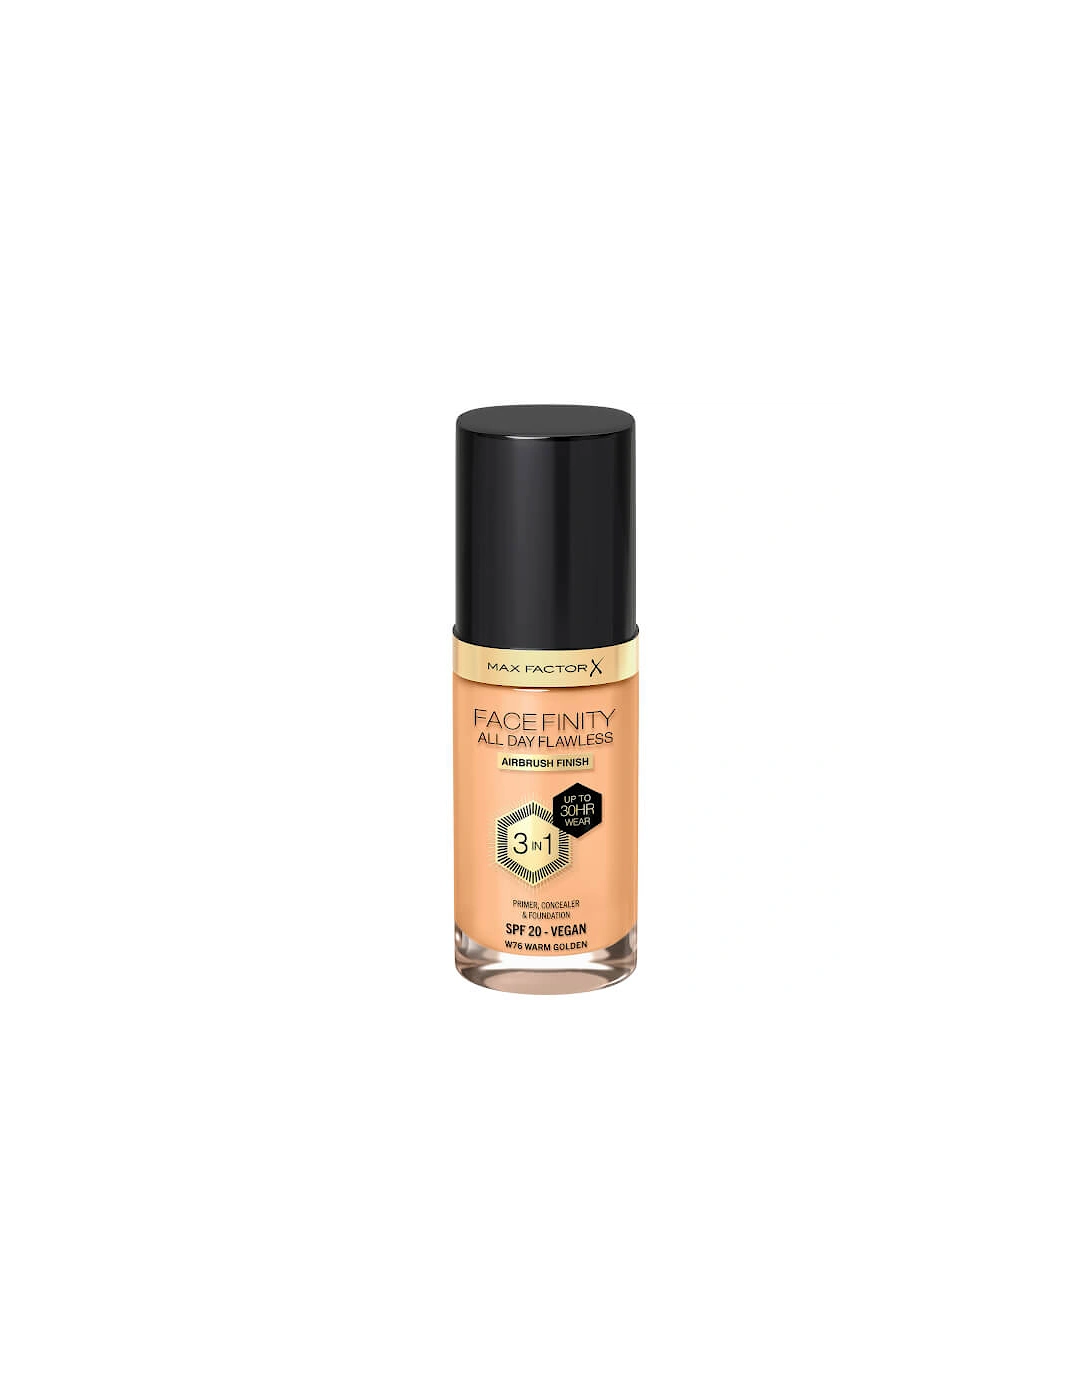 Facefinity All Day Flawless 3 in 1 Vegan Foundation - W76 Warm Golden, 2 of 1